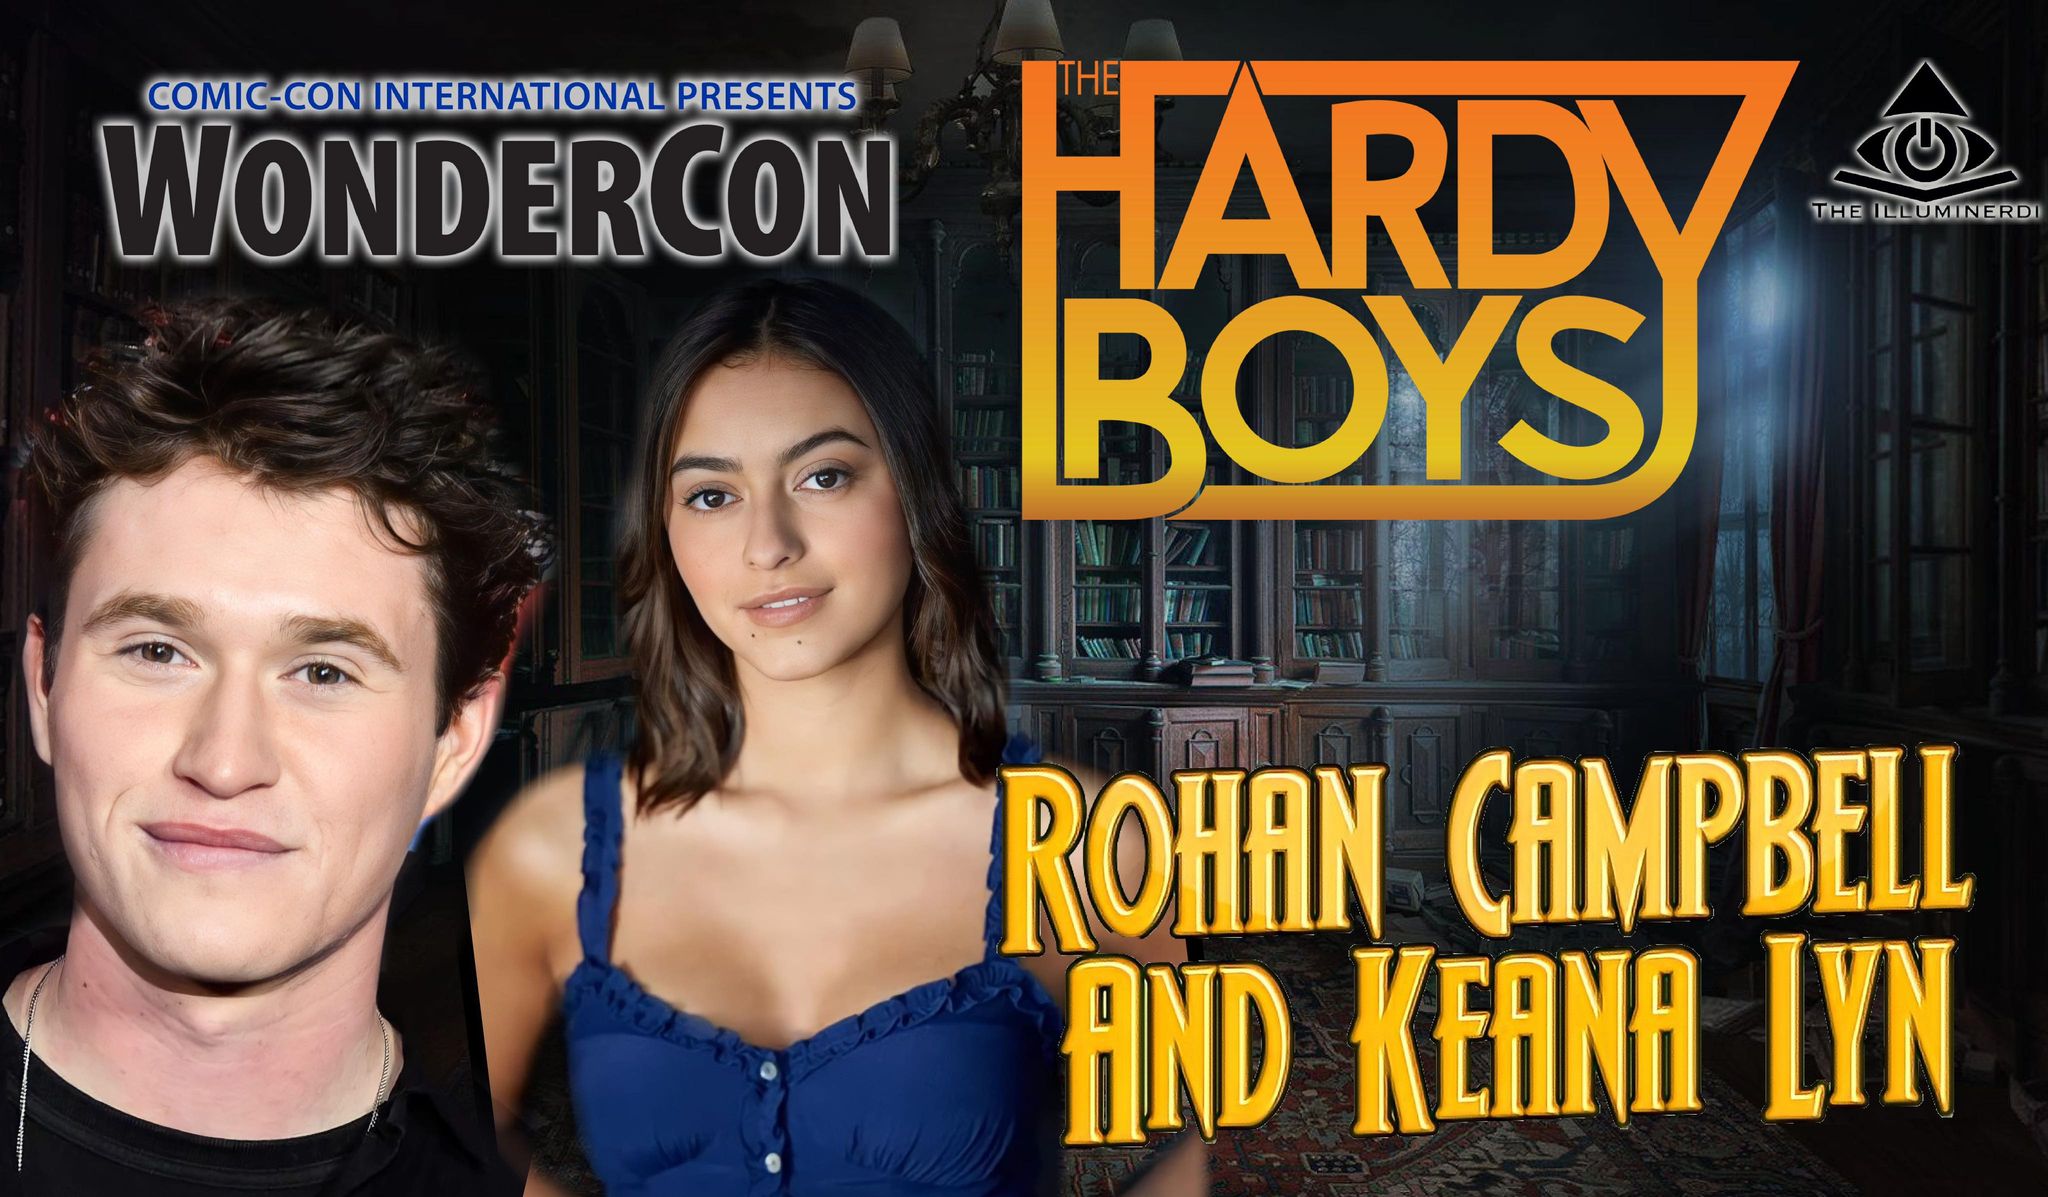 Hardy Boys Stars Rohan Campbell and Keana Lyn Discuss Their Characters Relationship In Second Season: EXCLUSIVE INTERVIEW